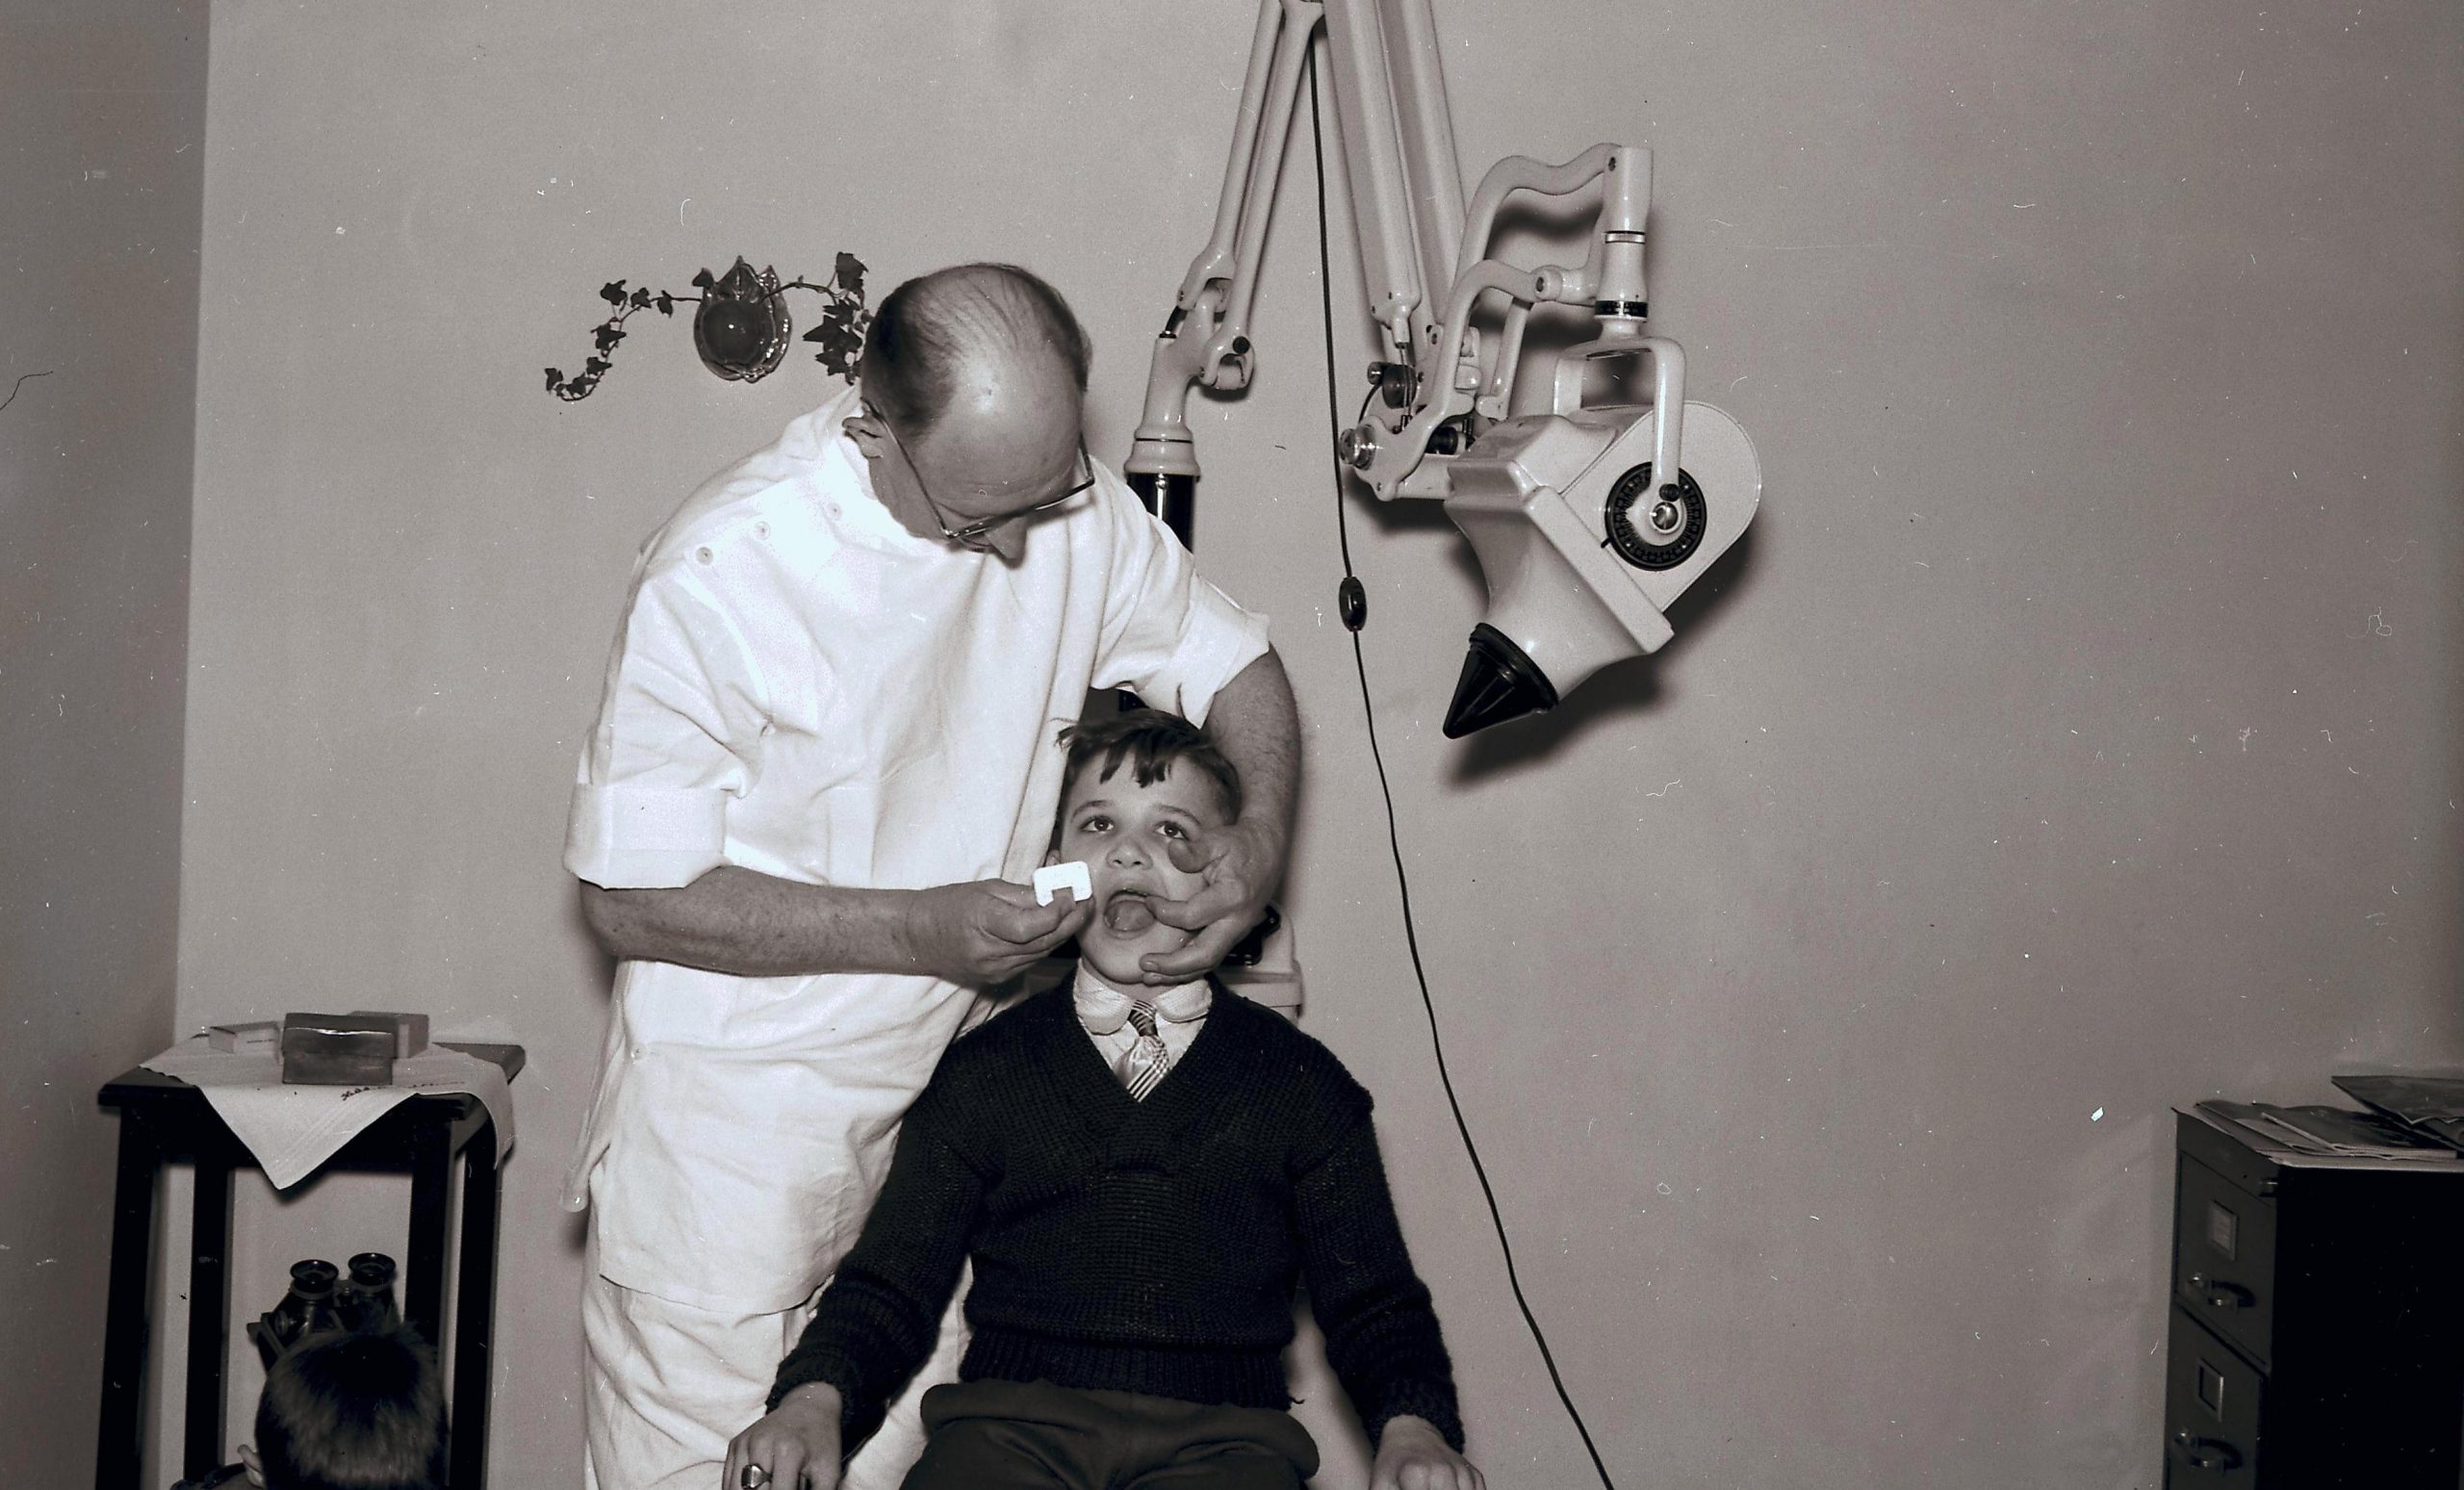 A student receives dental services in the early days of Milton Hershey School's dental program.